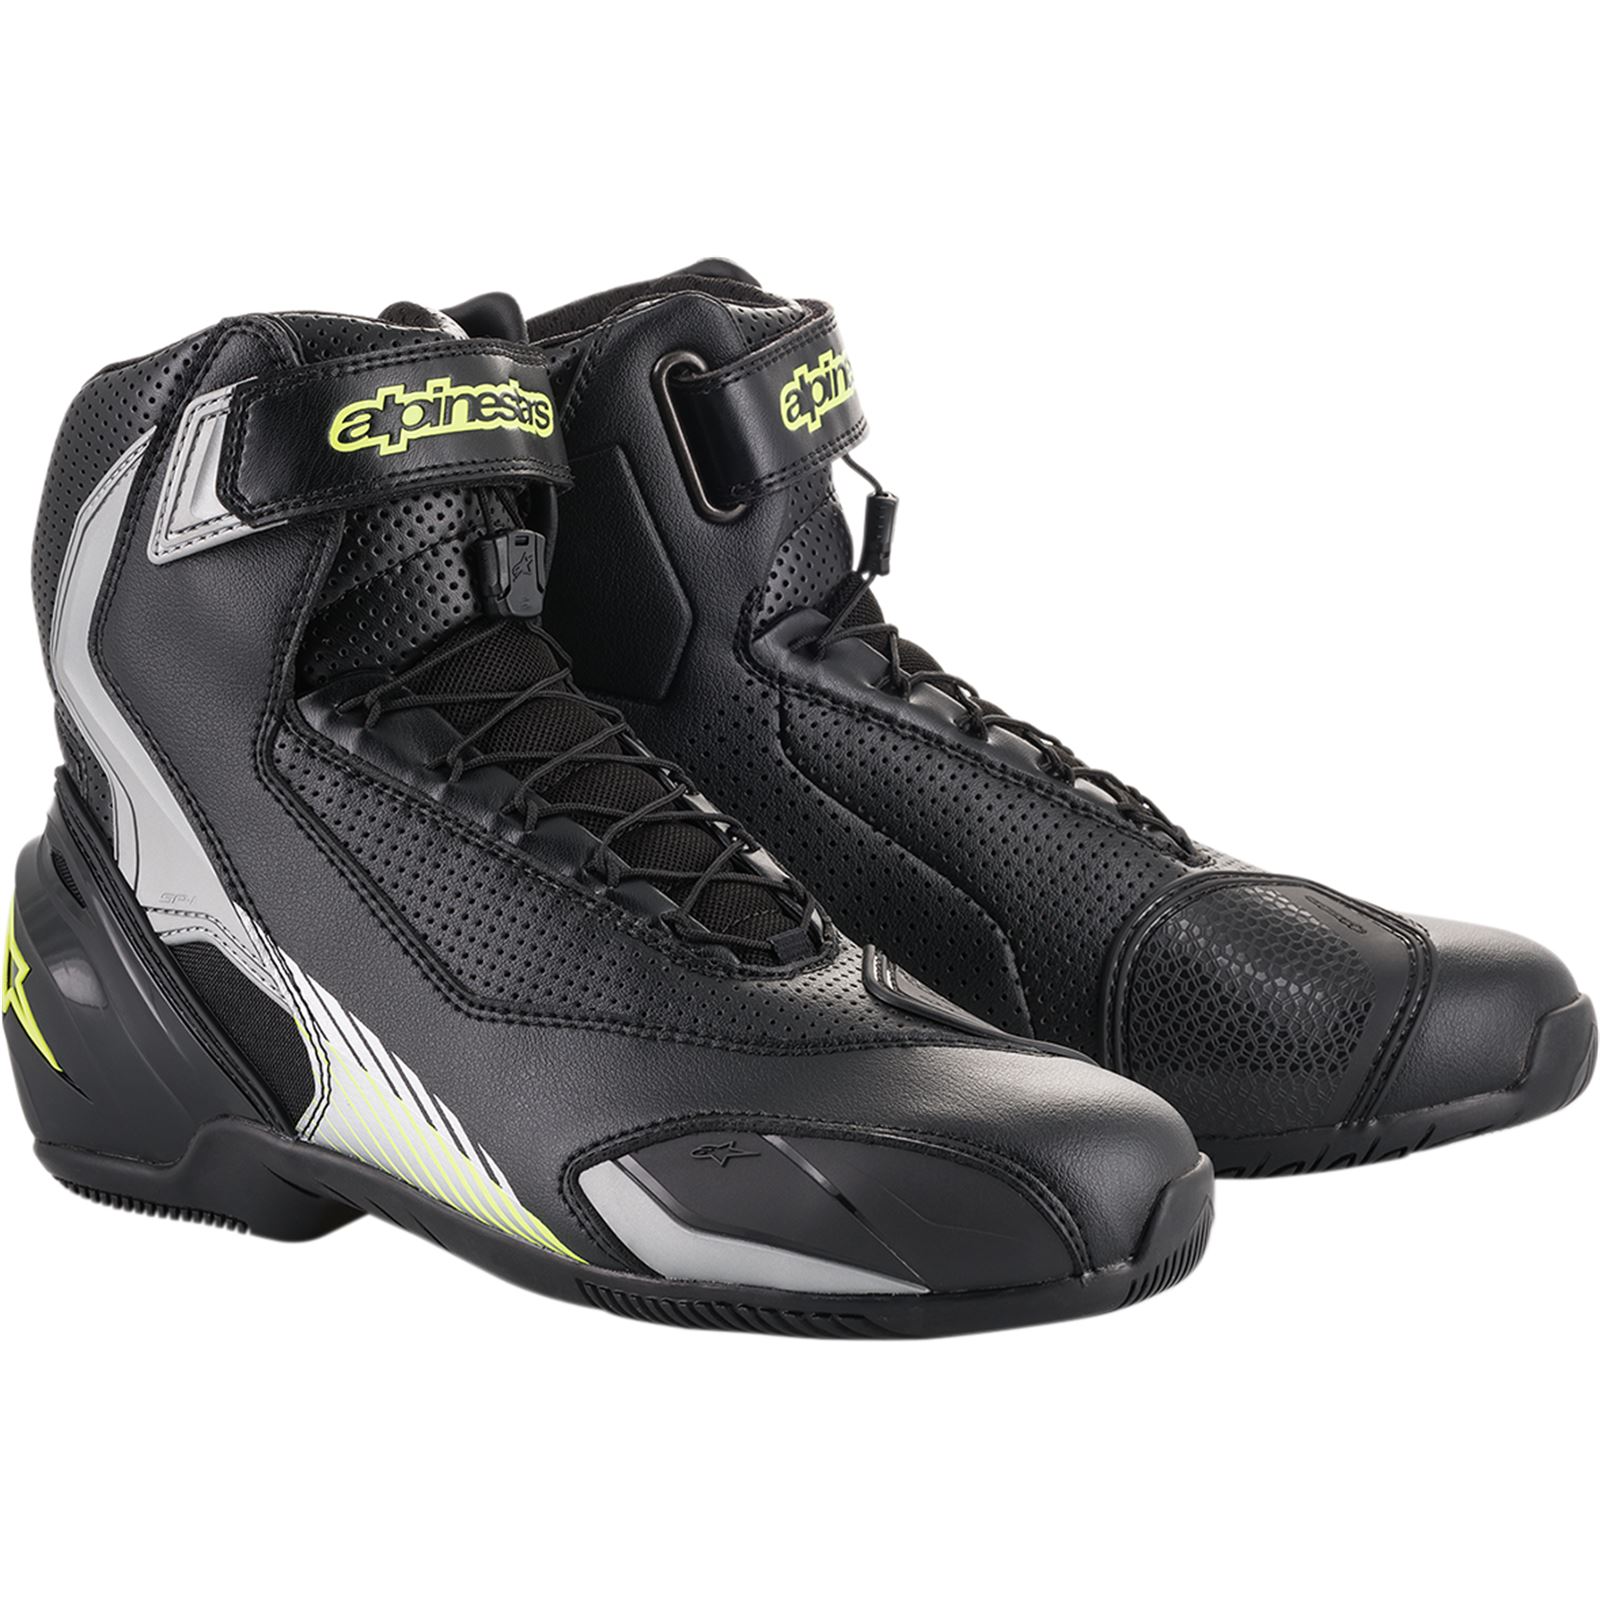 Alpinestars SP-1 v2 Vented Shoes - Black/Silver/Yellow Fluorescent - Size 12.5